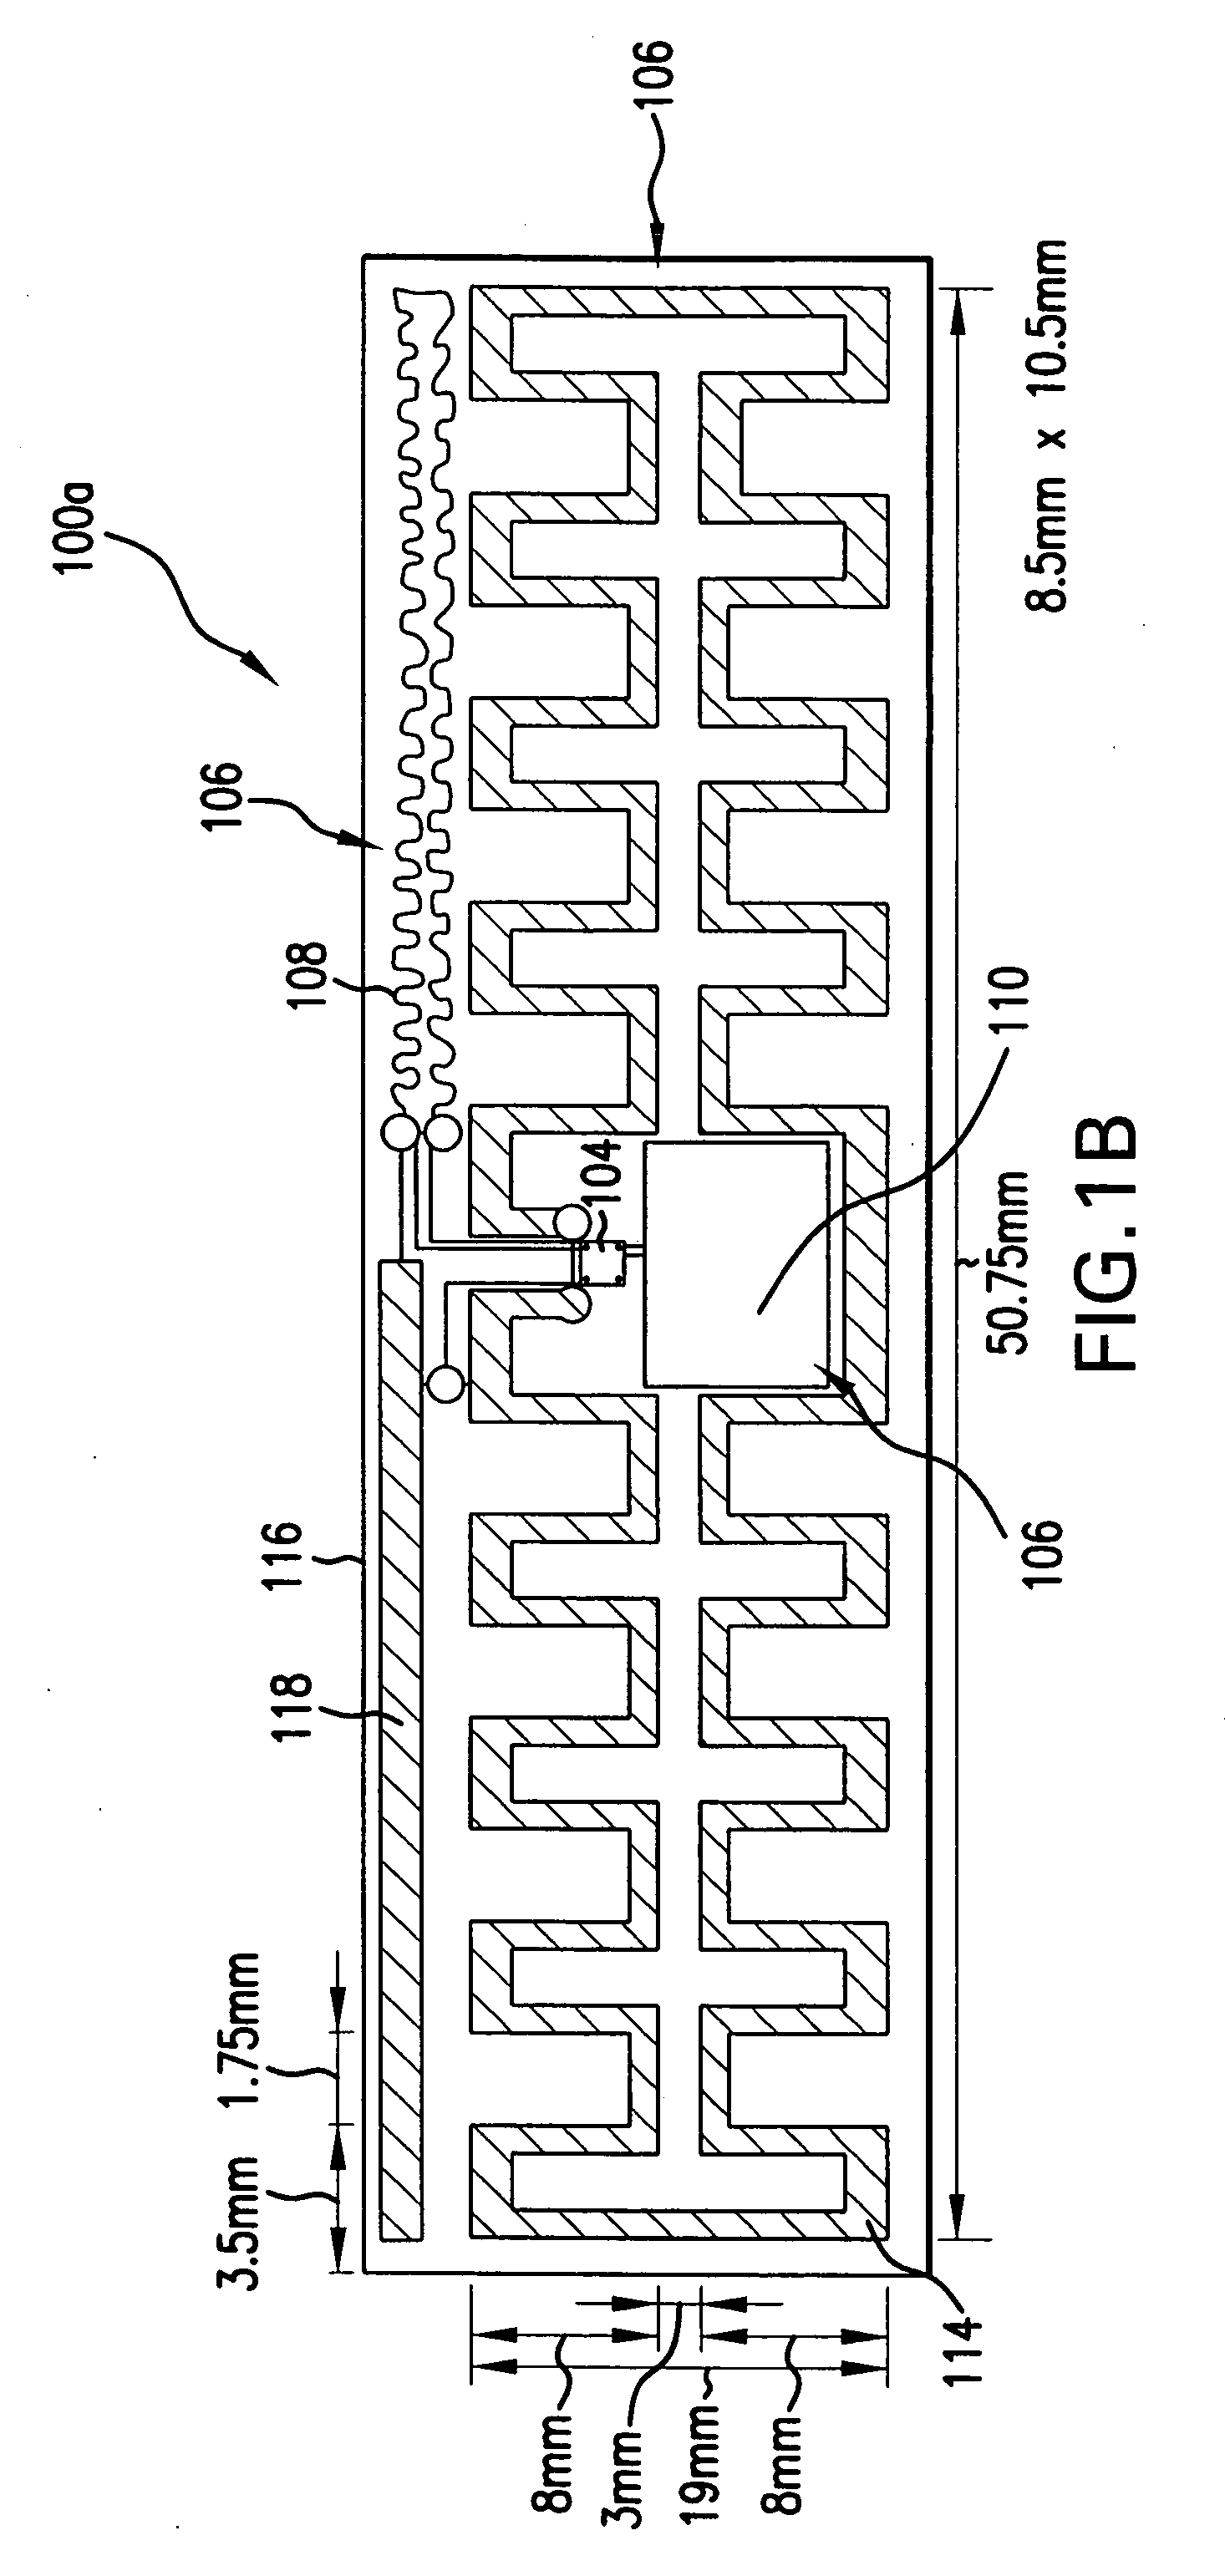 Method and system for forming a die frame and for transferring dies therewith